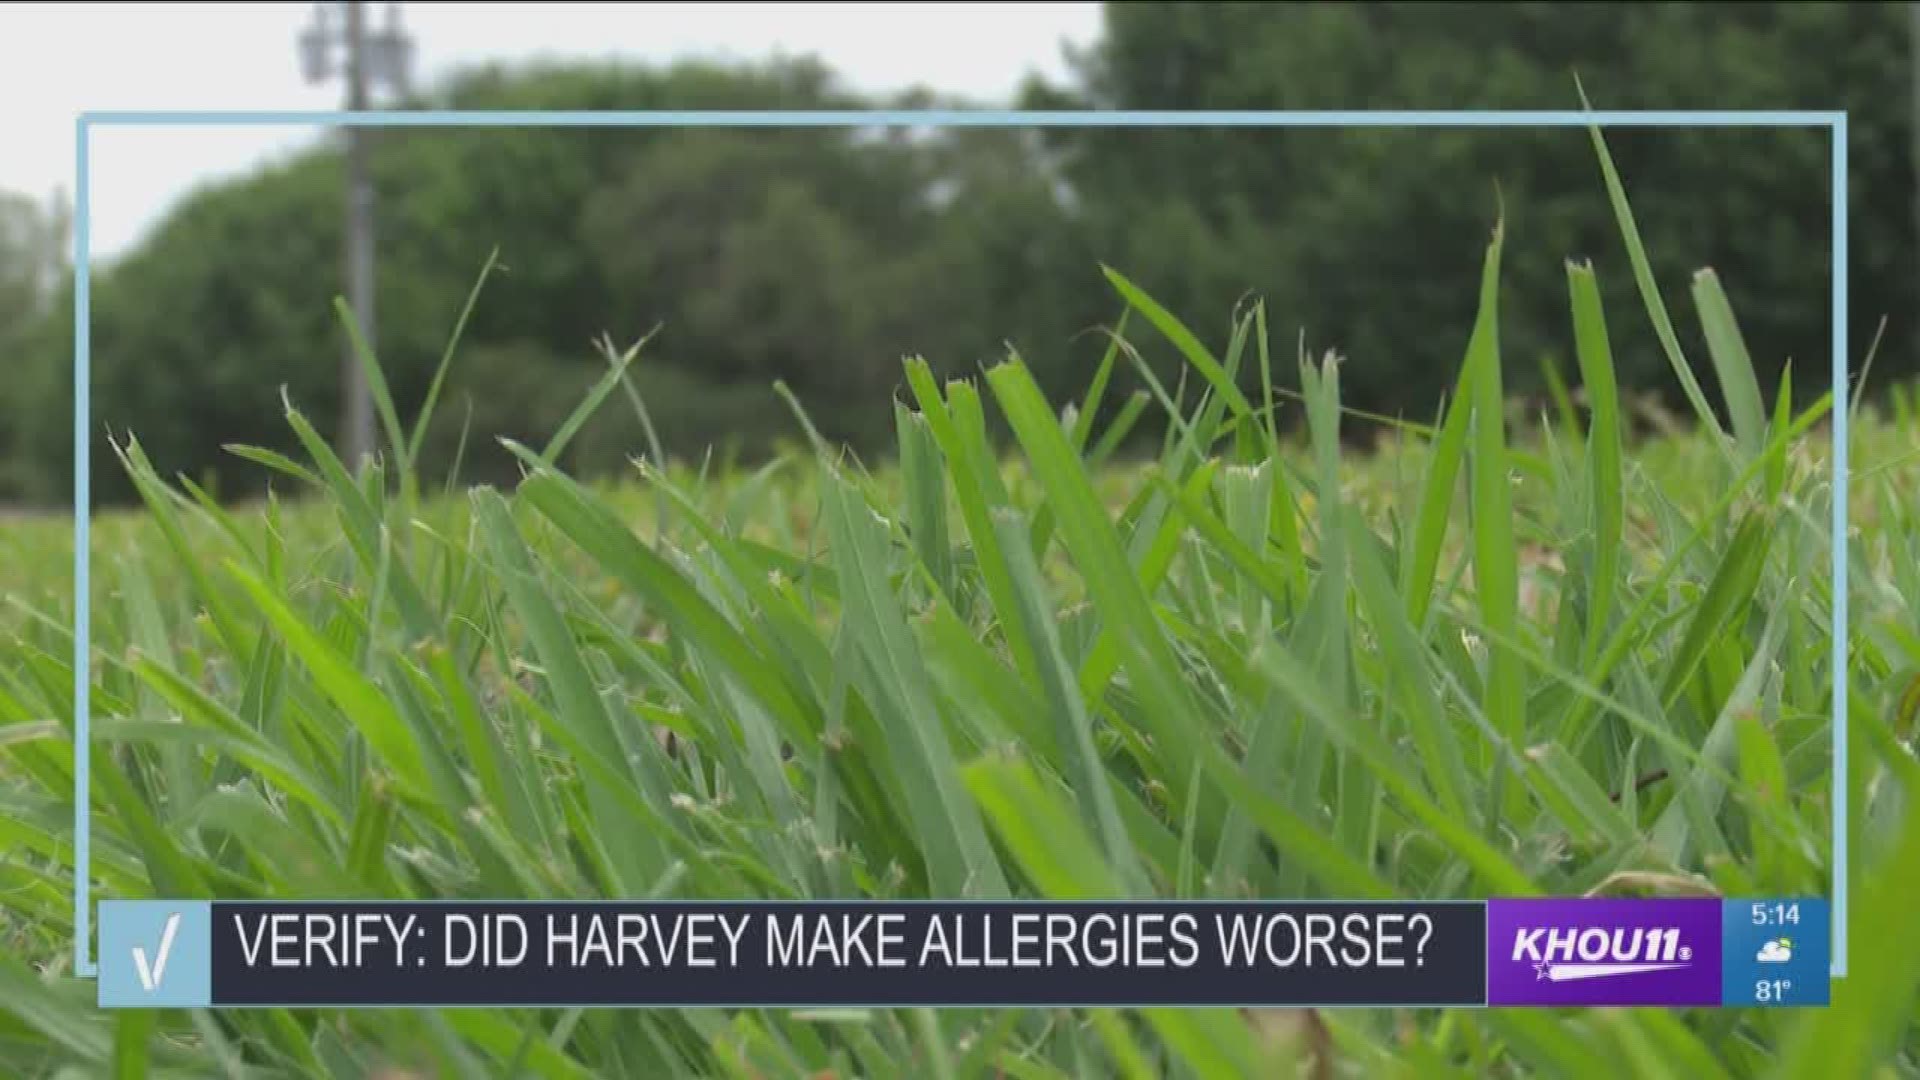 Allergy symptoms are affecting everyone, but is this year's much worse following Hurricane Harvey?